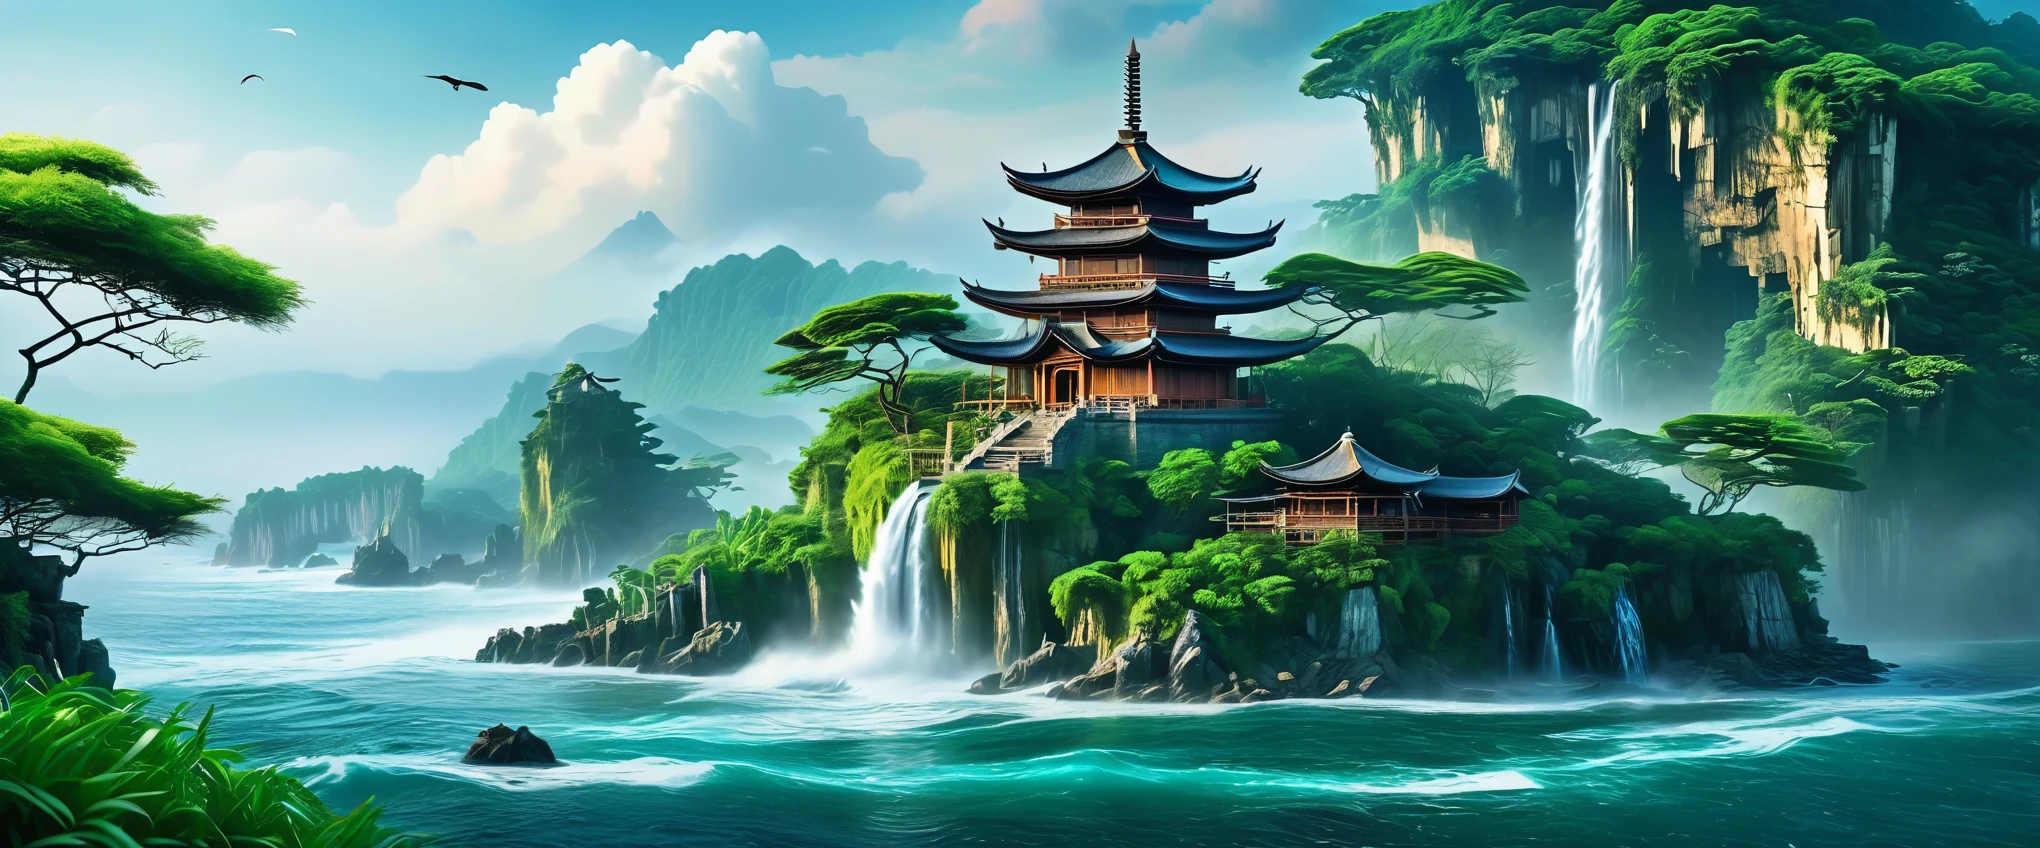 a detailed fantasy island landscape with a floating island center stage, a village with scenic architecture on the island, waterfalls flowing from the island into the surrounding sea, a nine-story pagoda at the center of the island, break, (best quality, masterpiece:1.2), ultra-detailed, (realistic, photo-realistic:1.37), cinematic composition, dramatic lighting, vibrant colors, highly detailed, fantasy, surreal, mystical, sacred architecture, ancient ruins, overgrown vegetation, rocky coastline, crashing waves, atmospheric mist, ethereal lighting, dramatic sky, glowing pagoda, floating island, scenic, village on island, waterfalls, rugged terrain, endless sea, ((isolated island)), There is a bamboo house hidden in the forest, There is a large village next to the tower, photorealistic, 8k, highres